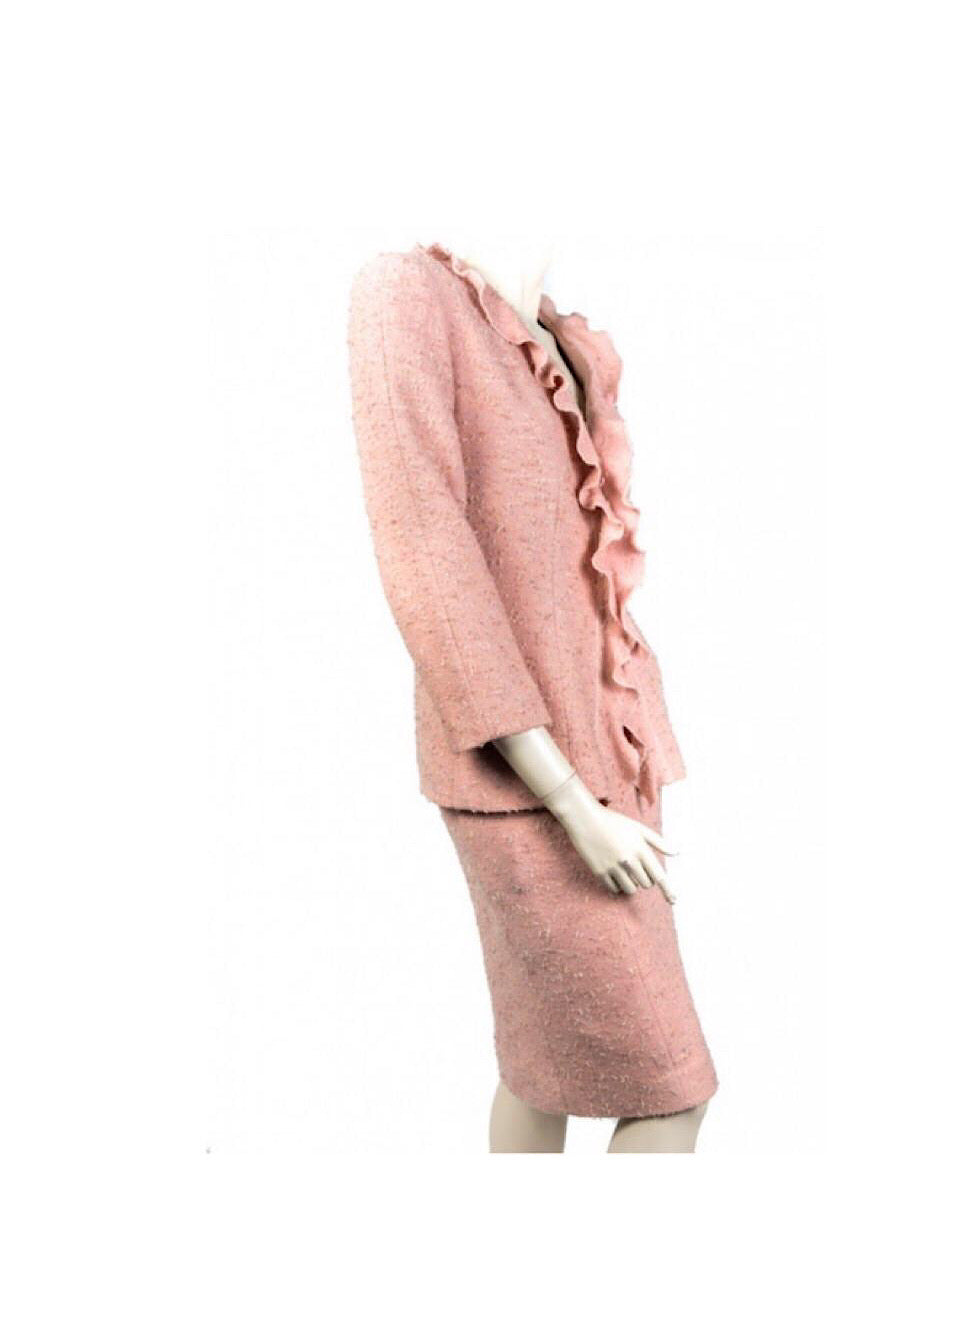 HelensChanel Vintage Chanel 99a 1999 Fall Pink Skirt Suit US 6/8